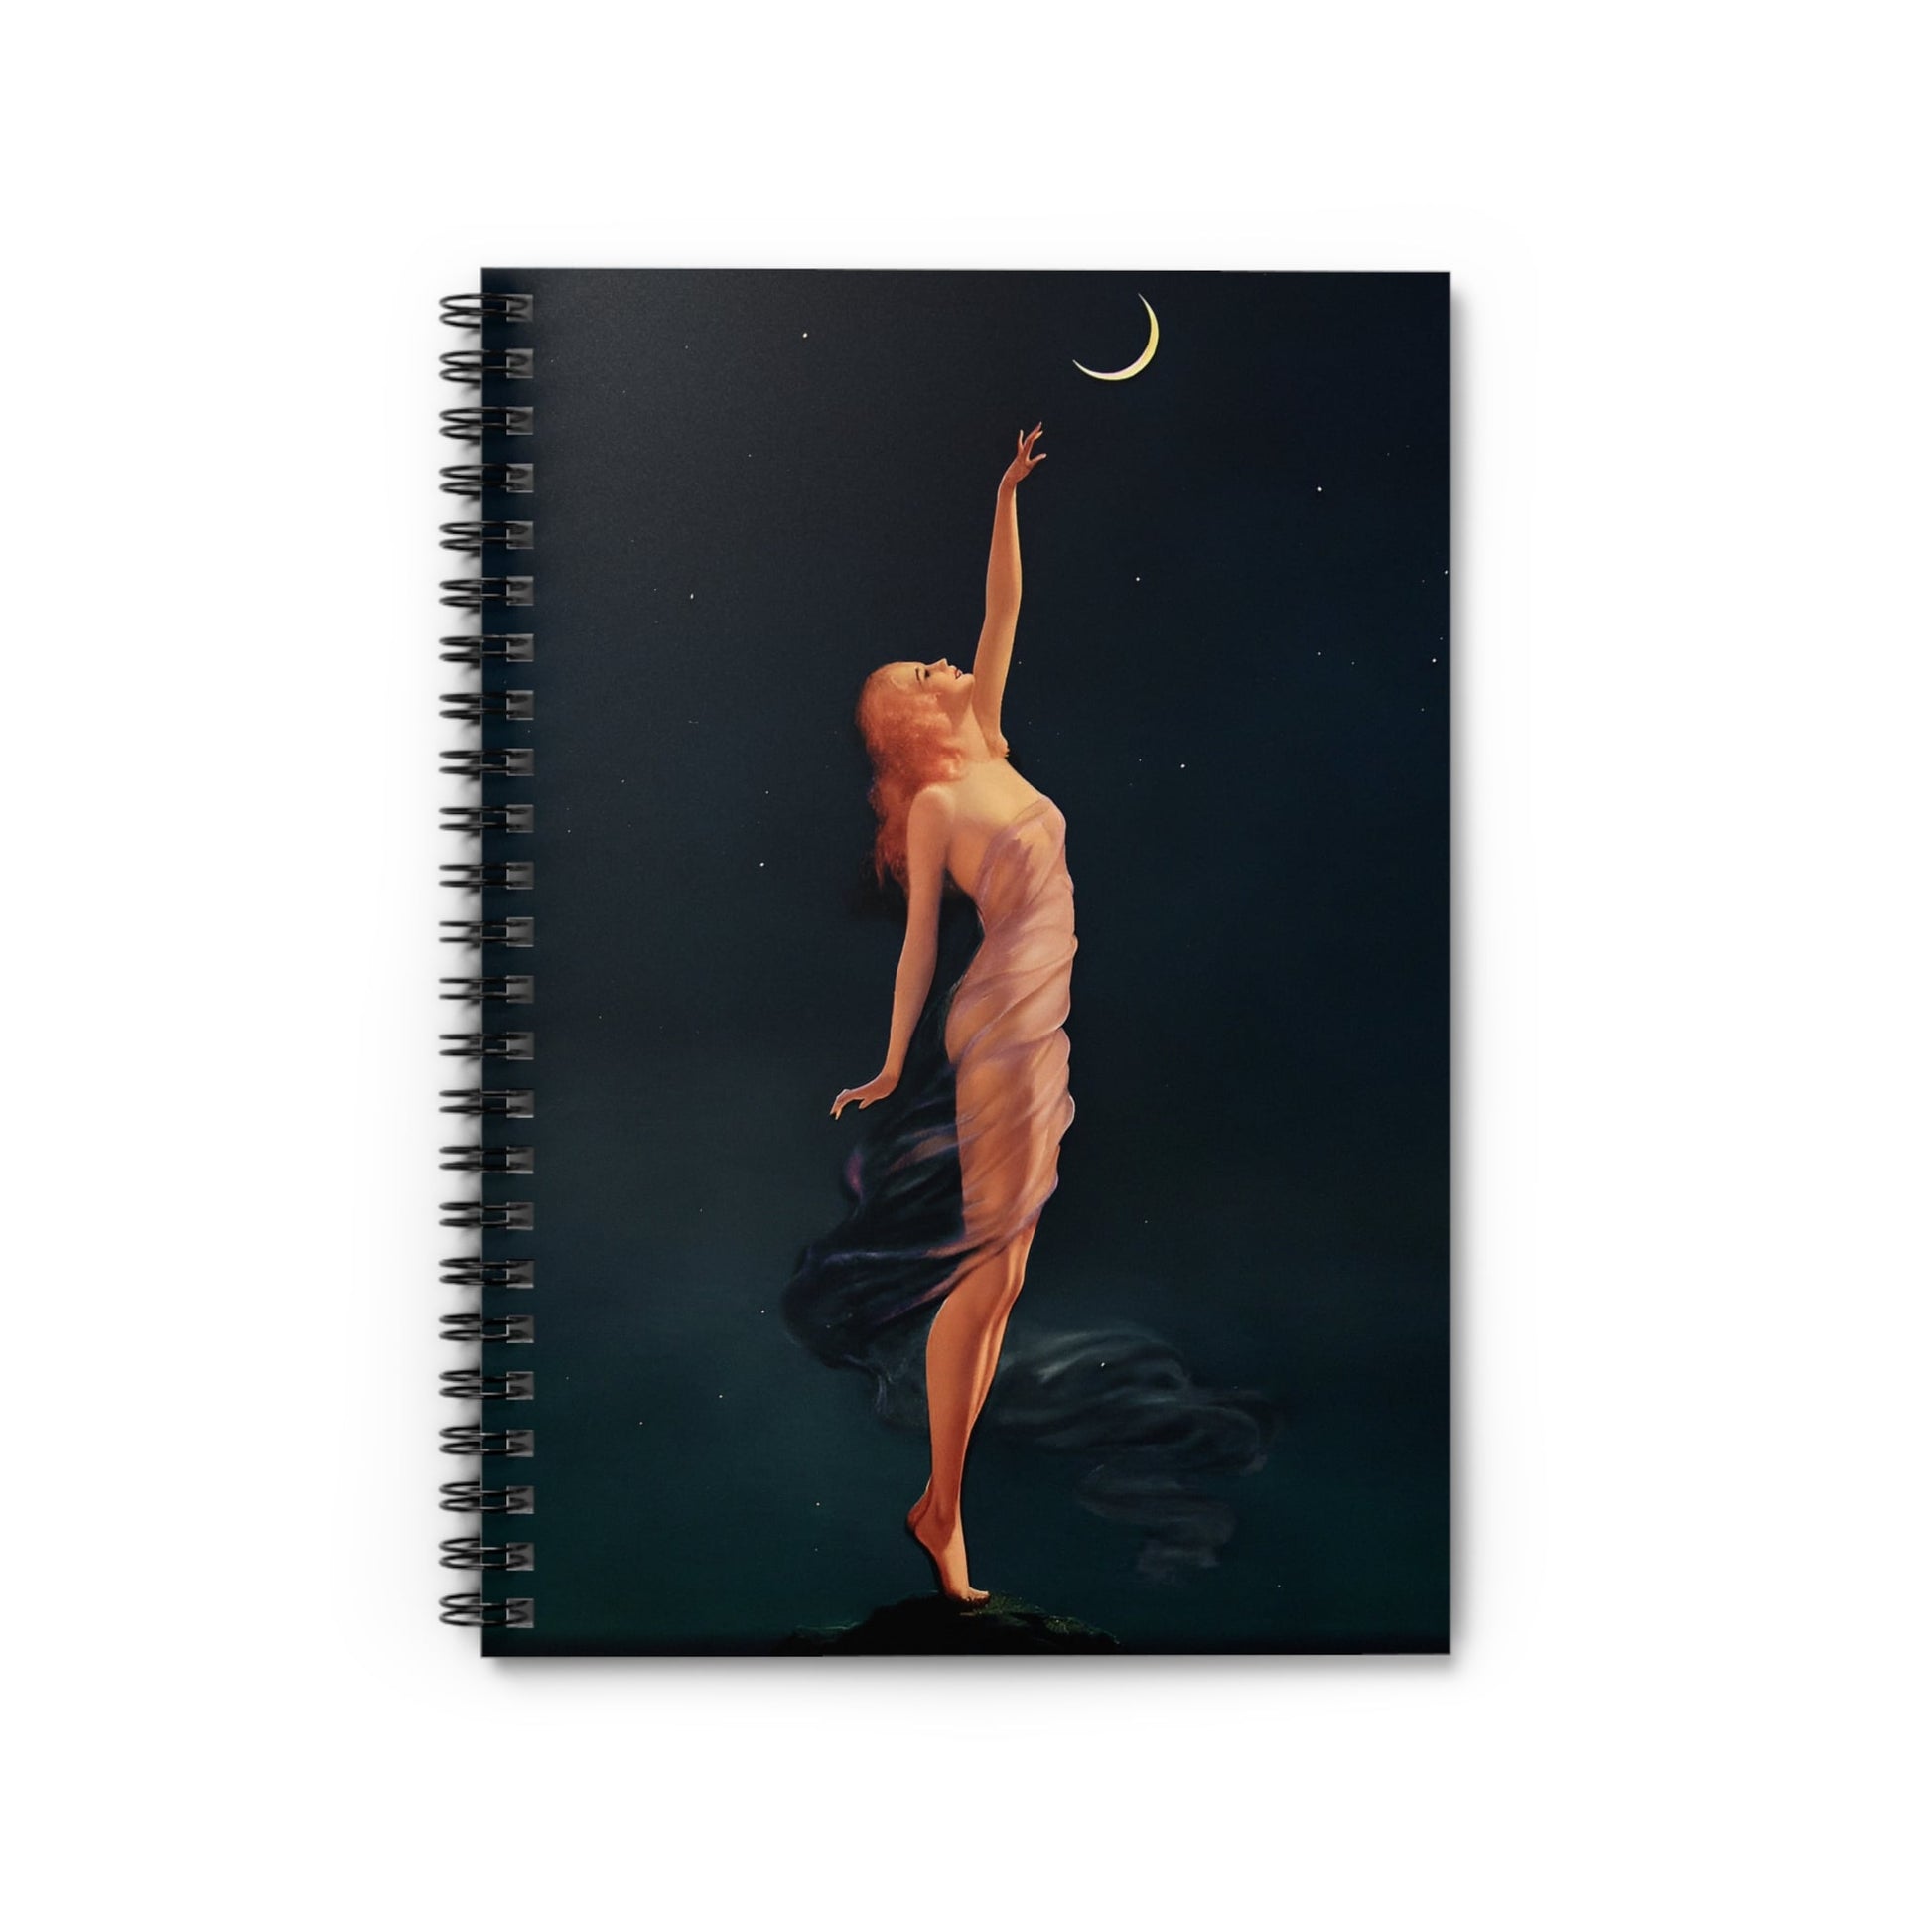 Art Nouveau Notebook with reaching for the moon cover, great for dreamers, featuring enchanting art nouveau illustrations.